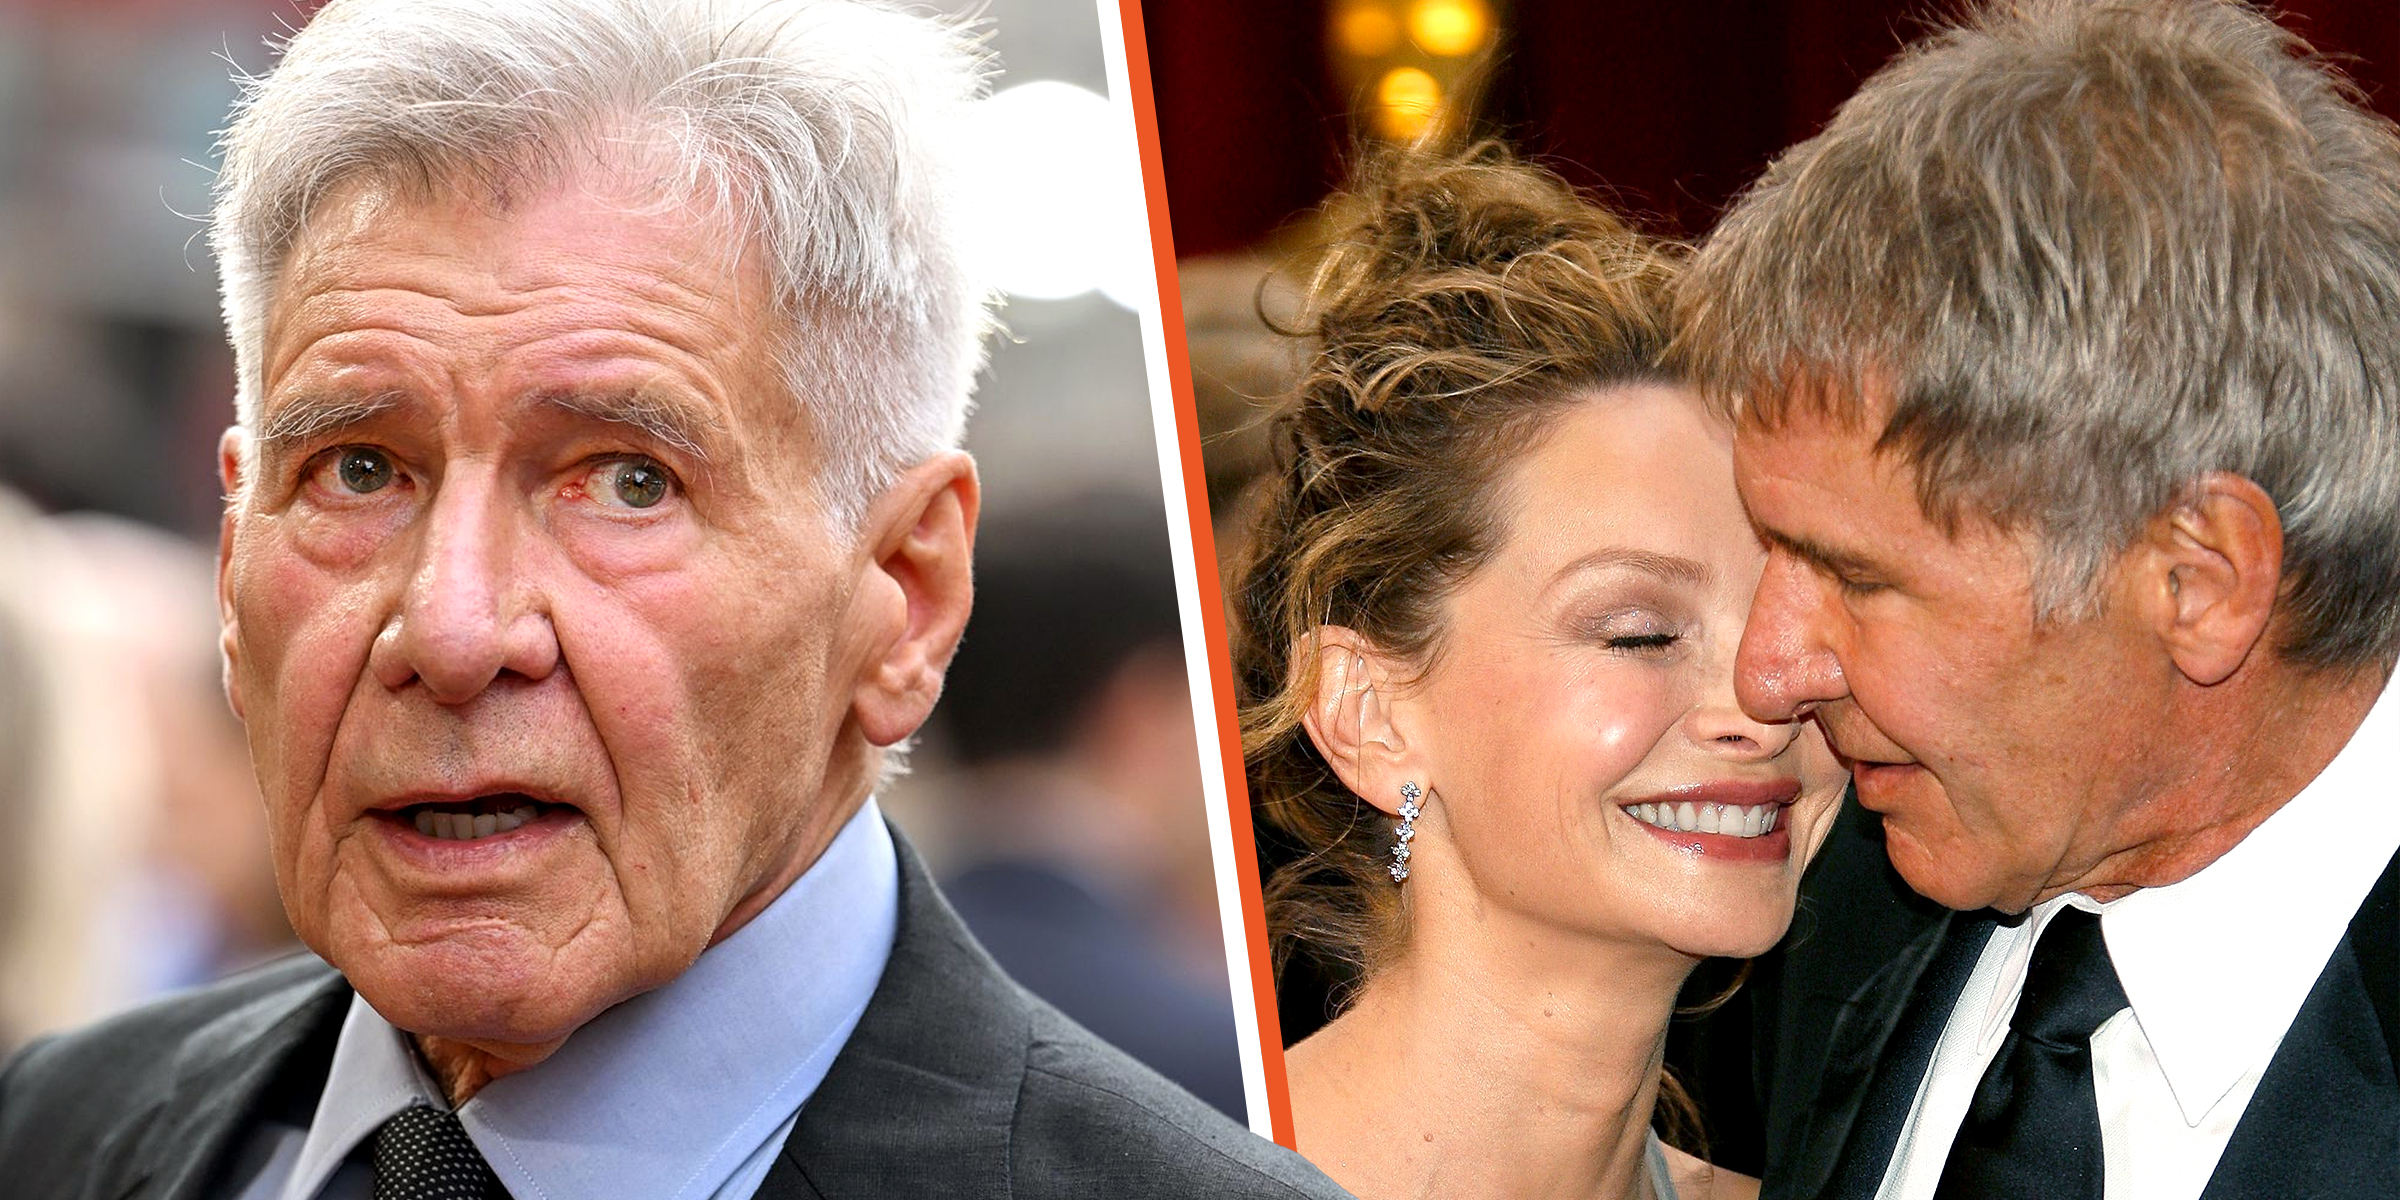 Harrison Ford | Harrison Ford and Calista Flockhart | Source: Getty Images